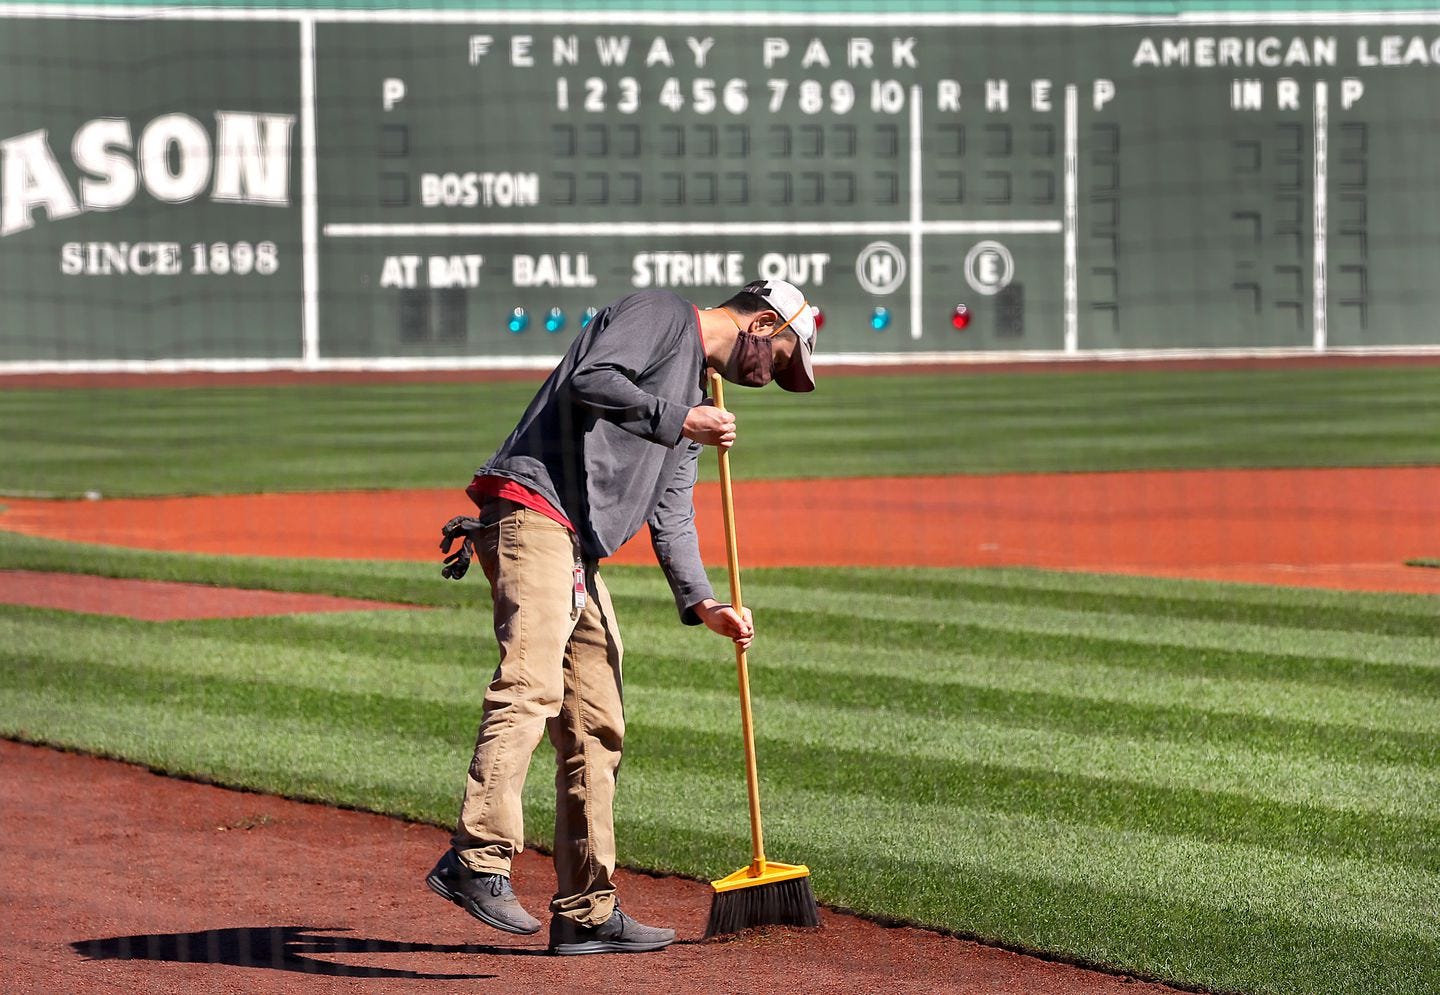 Preparations were made for Opening Day at Fenway Park on Tuesday as workers were busy sprucing up the park and making it safe for spectators.